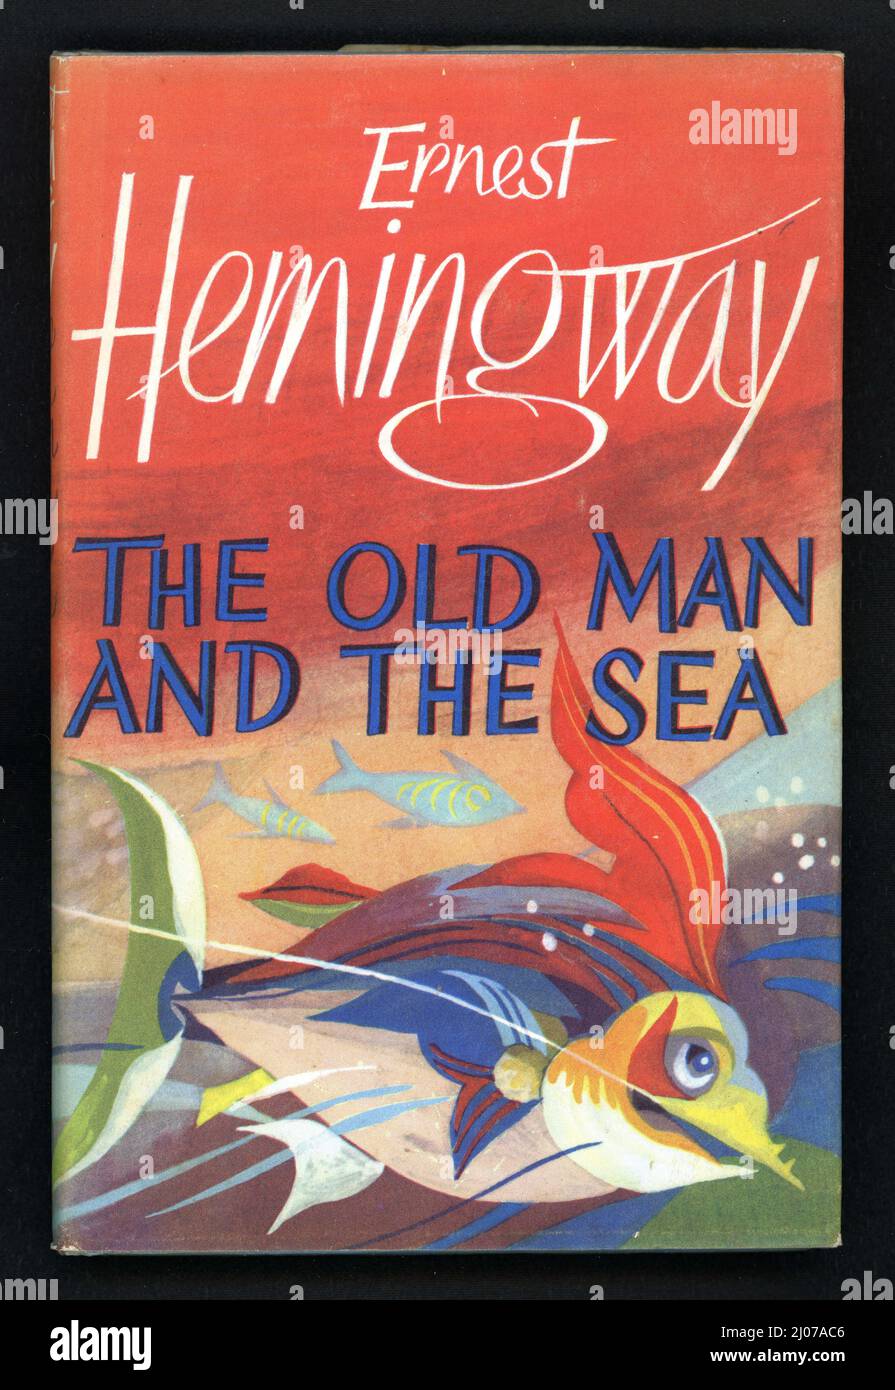 Wonderful original retro / mid-century Illustrated book cover of 'The Old Man and the Sea', published in 1952 written by famous American author, Ernest Hemingway. Illustrated by Hans Tisdall. First British publication. Stock Photo